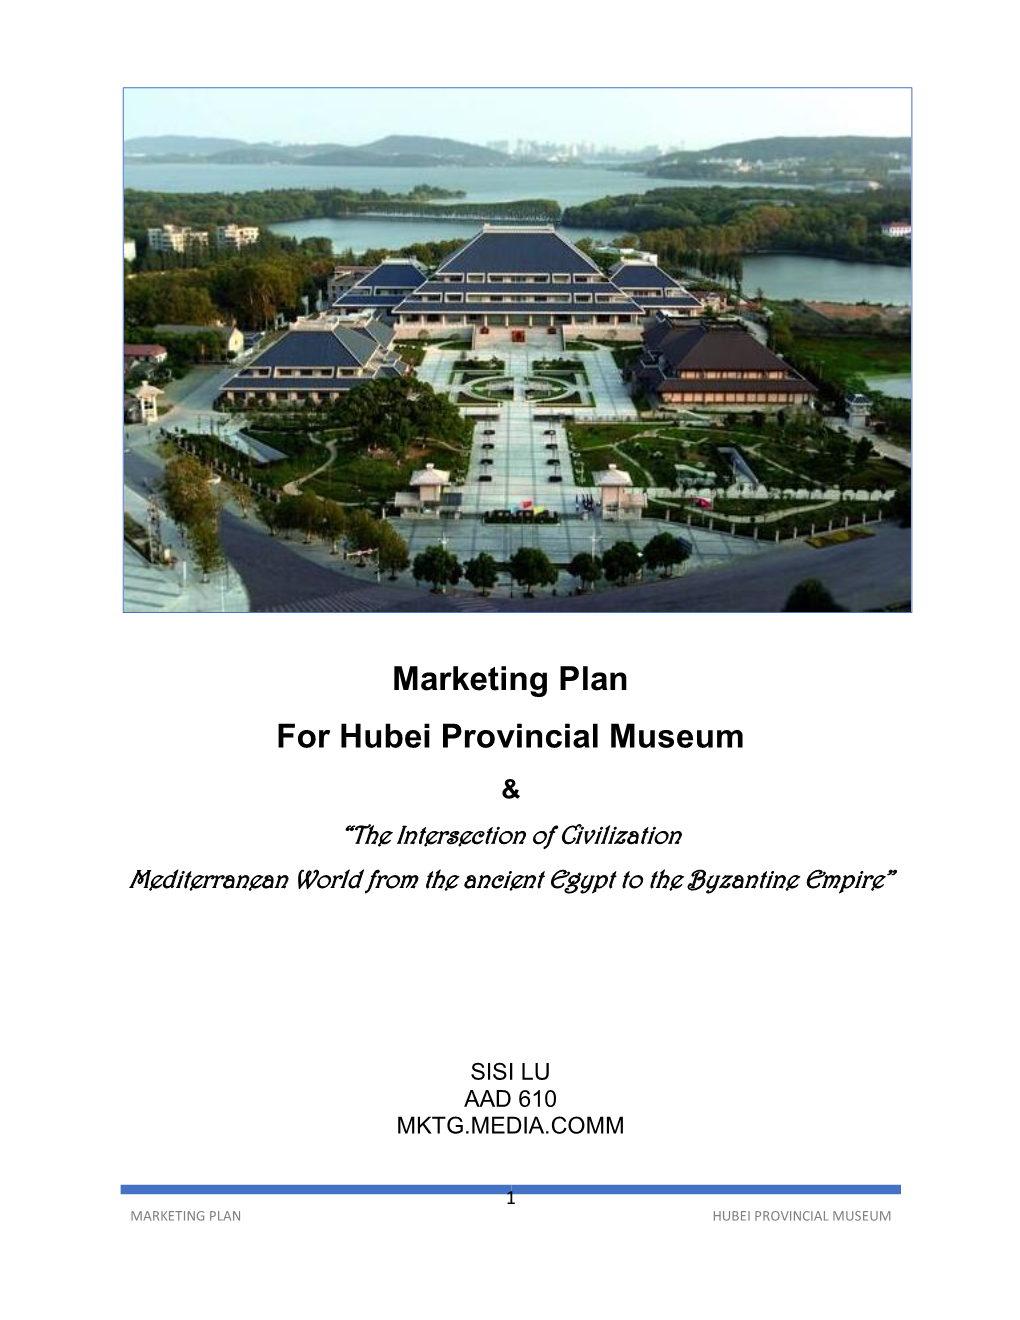 Marketing Plan for Hubei Provincial Museum & “The Intersection of Civilization Mediterranean World from the Ancient Egypt to the Byzantine Empire”